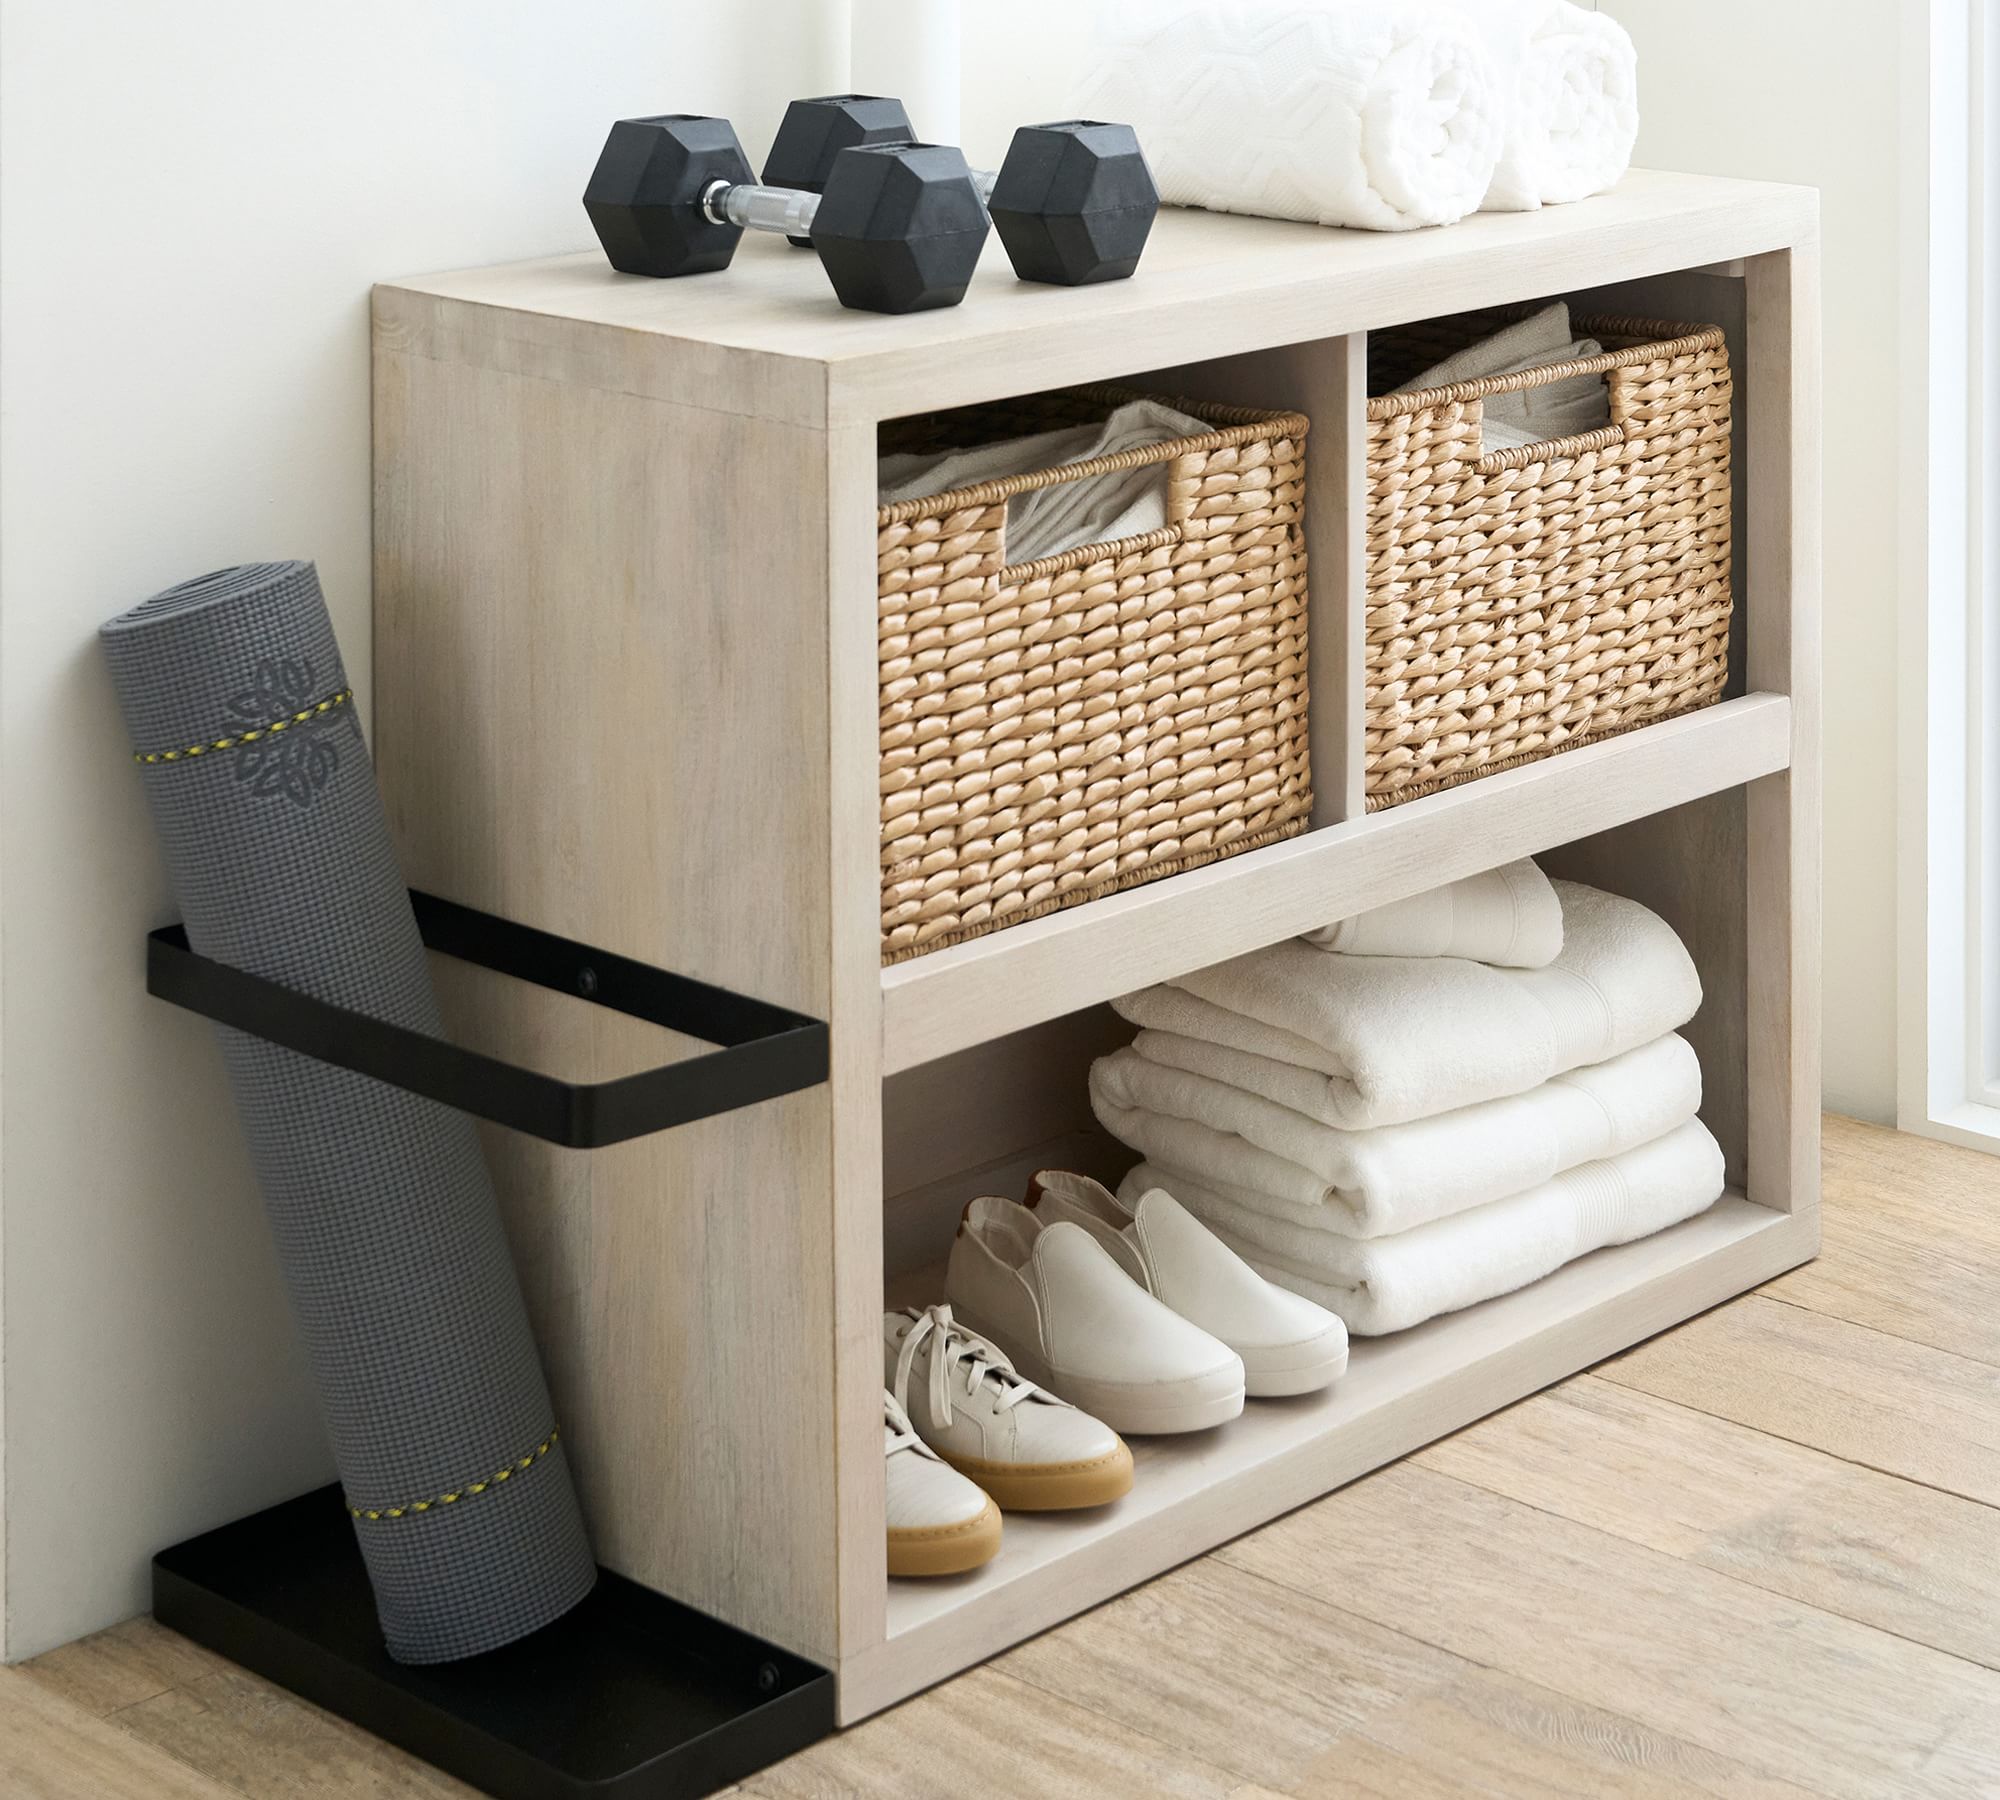 Cube storage for workout equipment